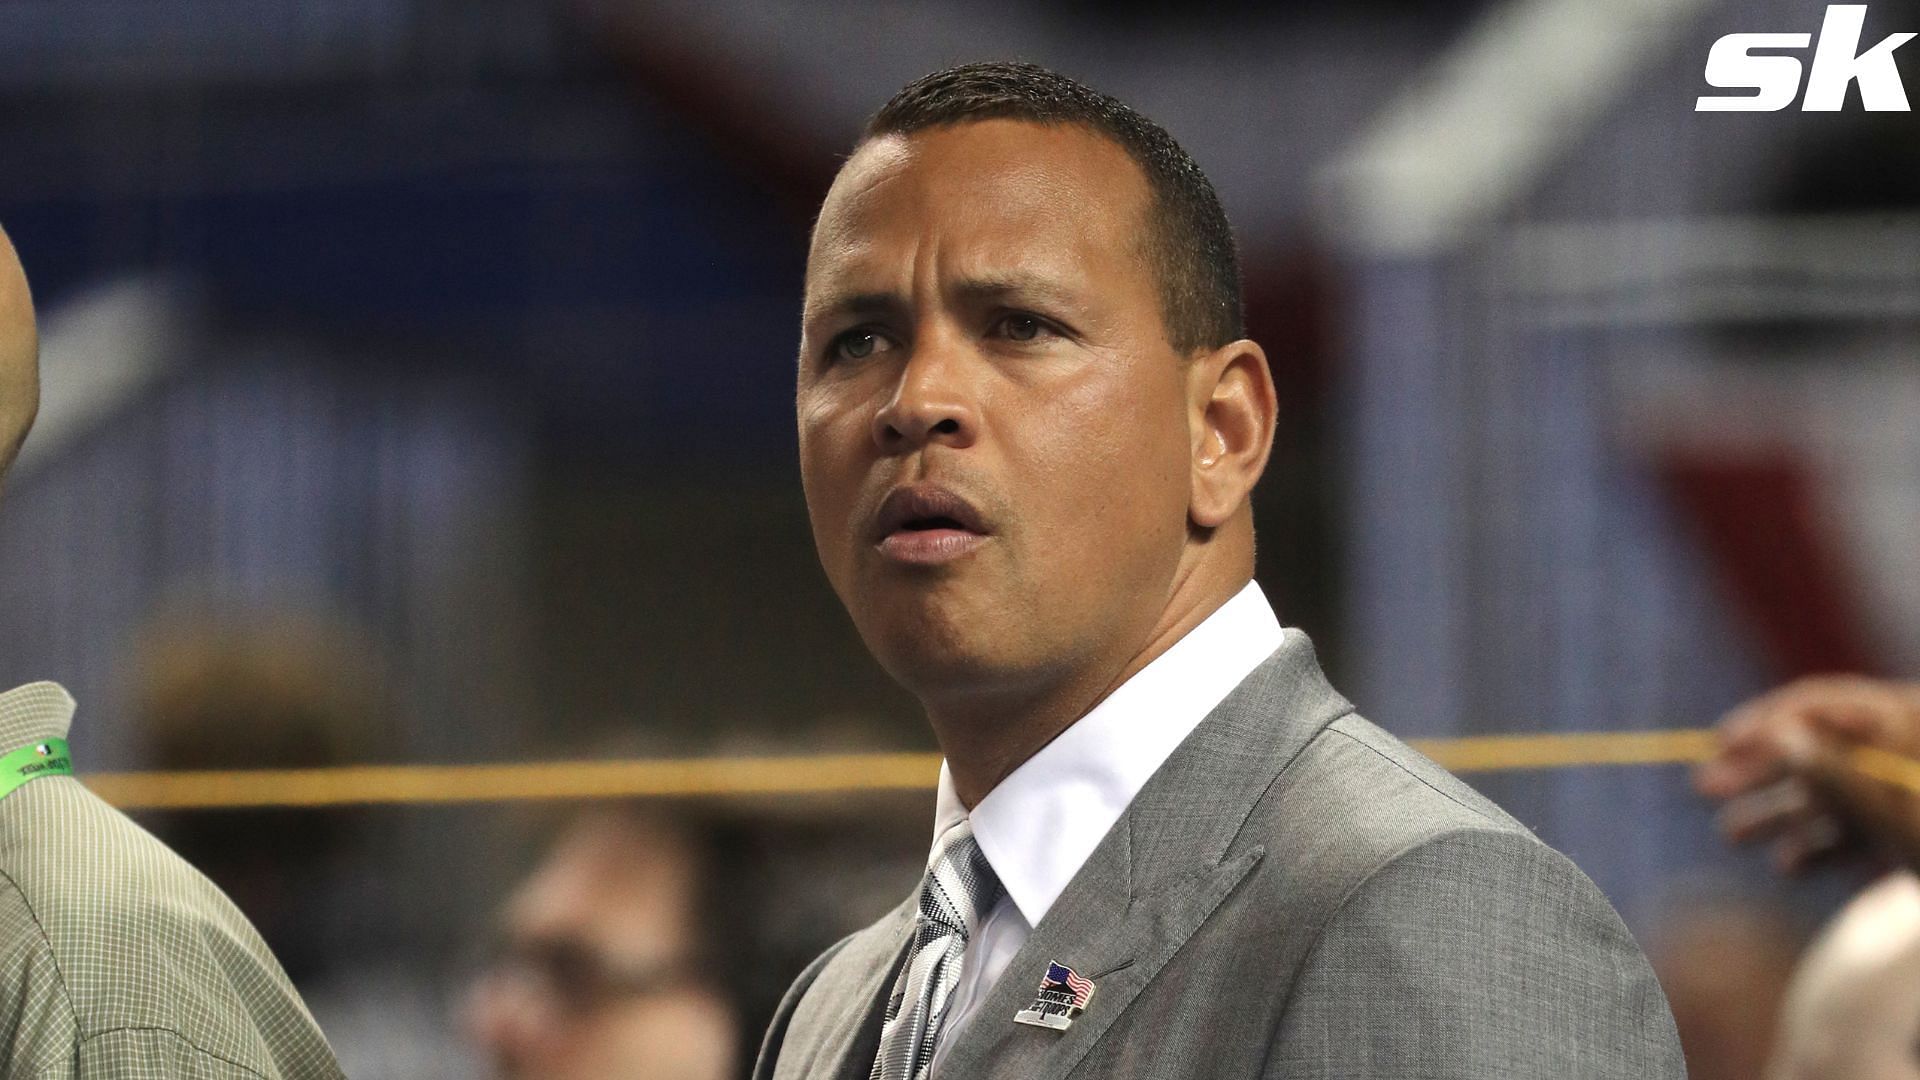 Alex Rodriguez penned a heartfelt apology before his return to the league in 2015